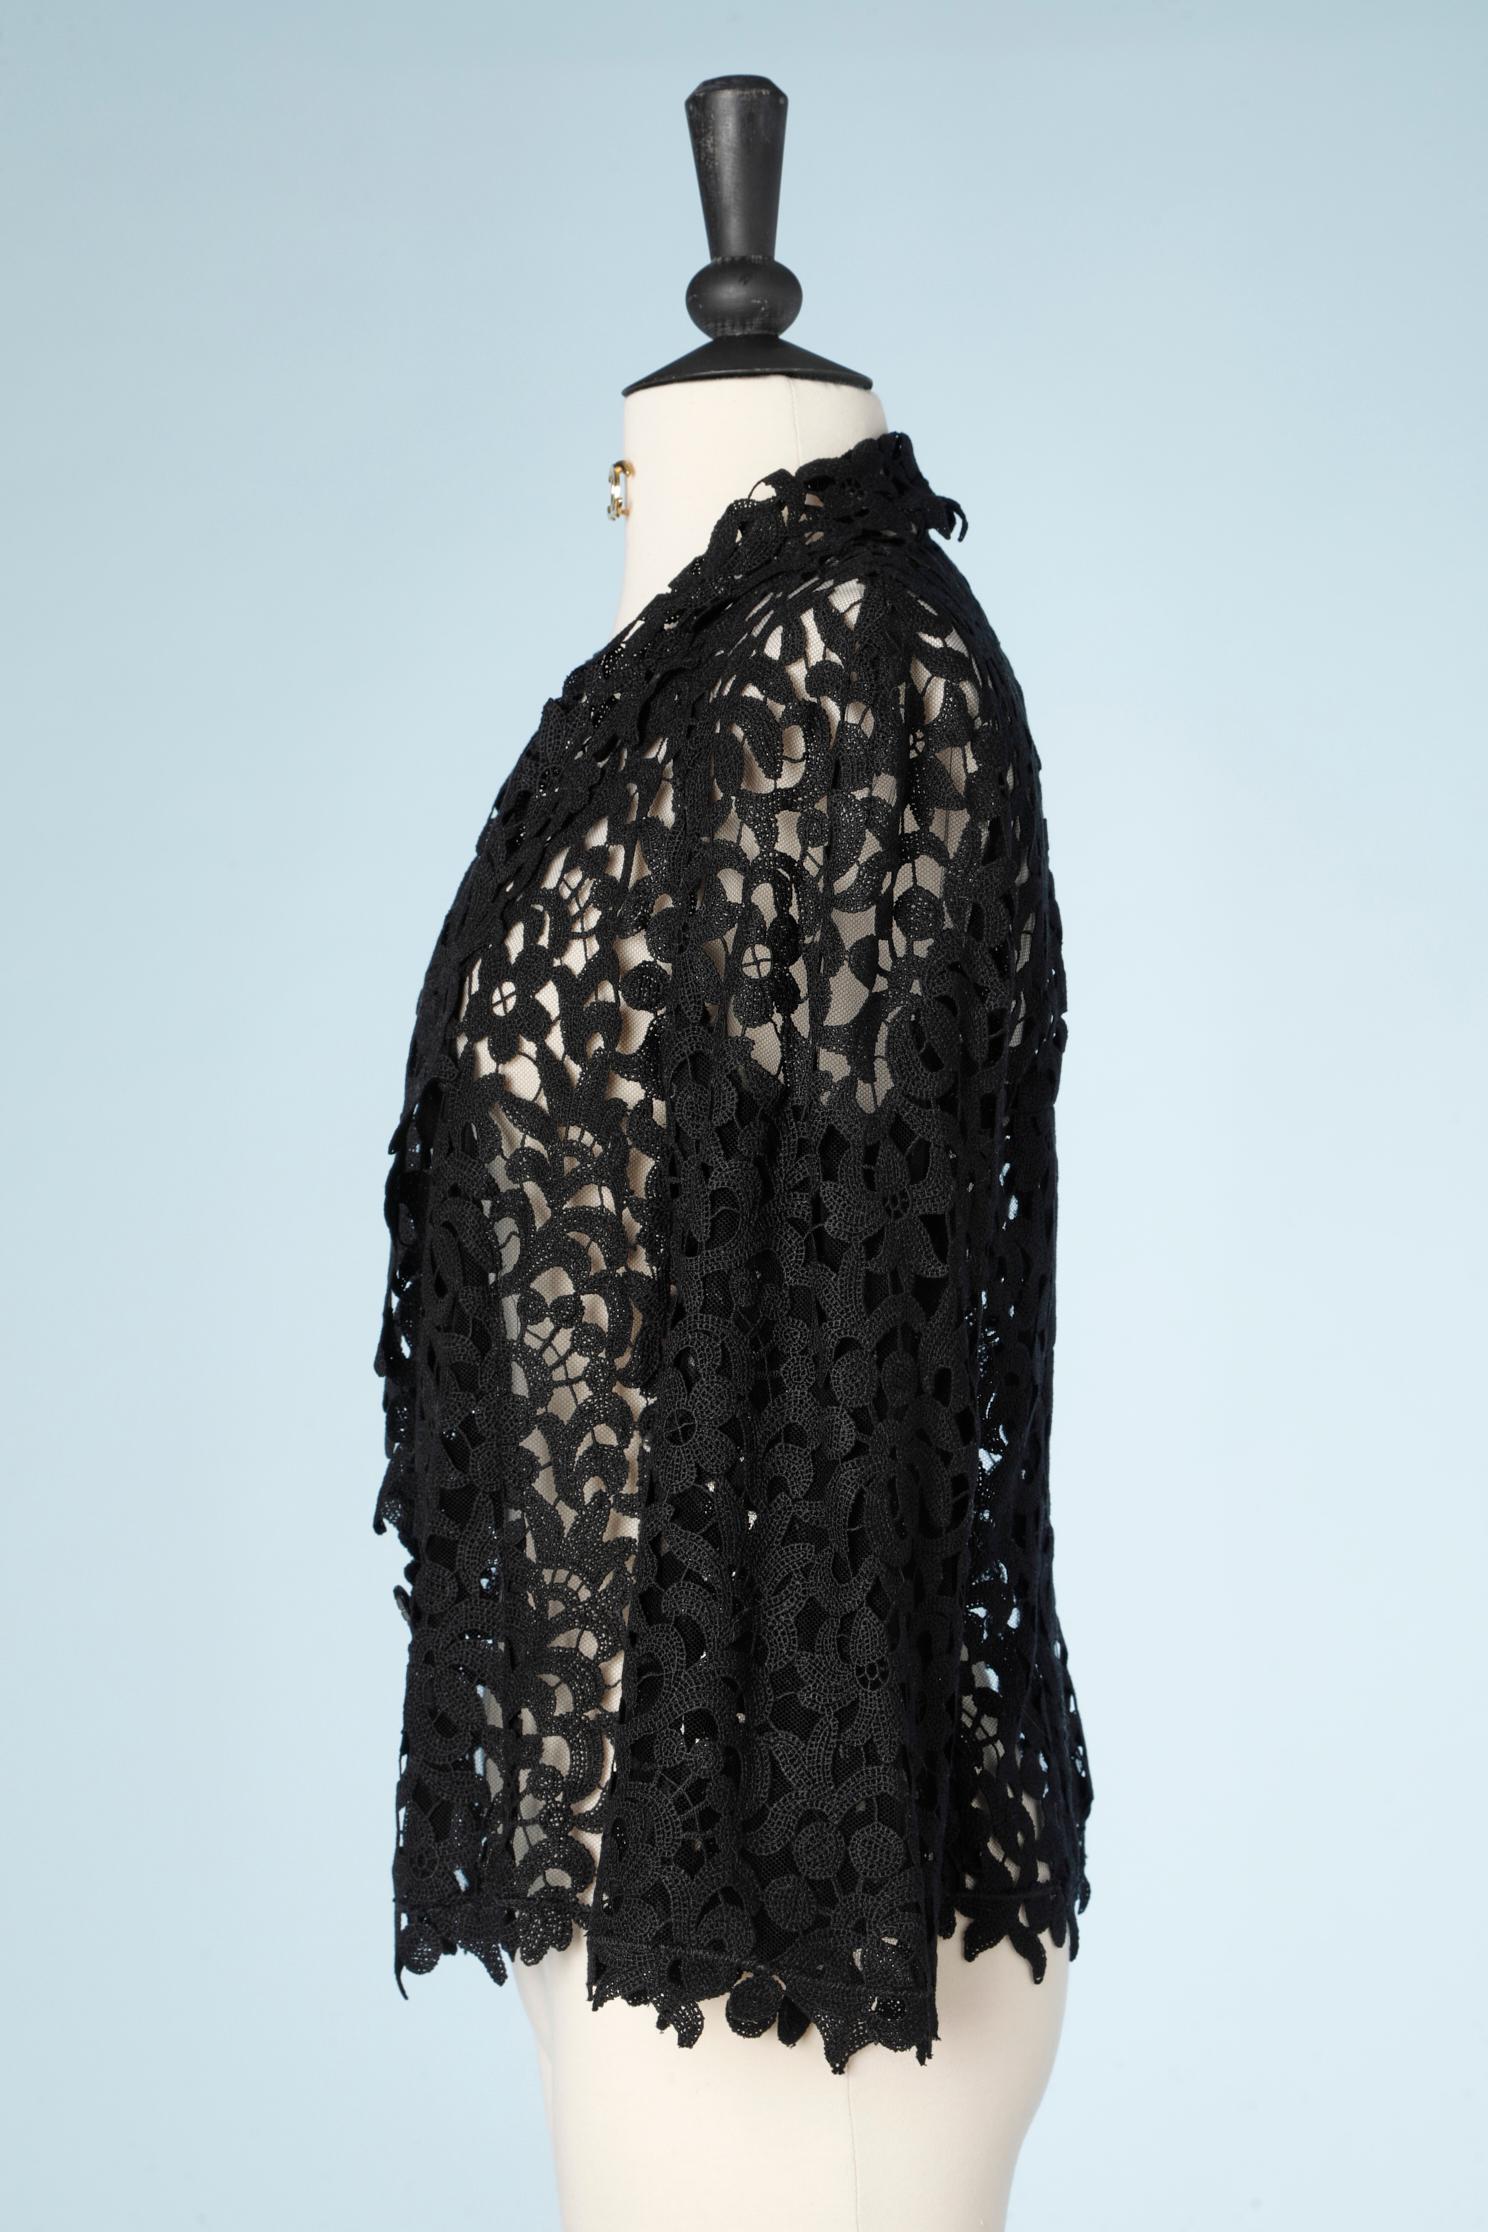 Women's See-through black lace ( guipure) jacket on black tulle base Chanel 